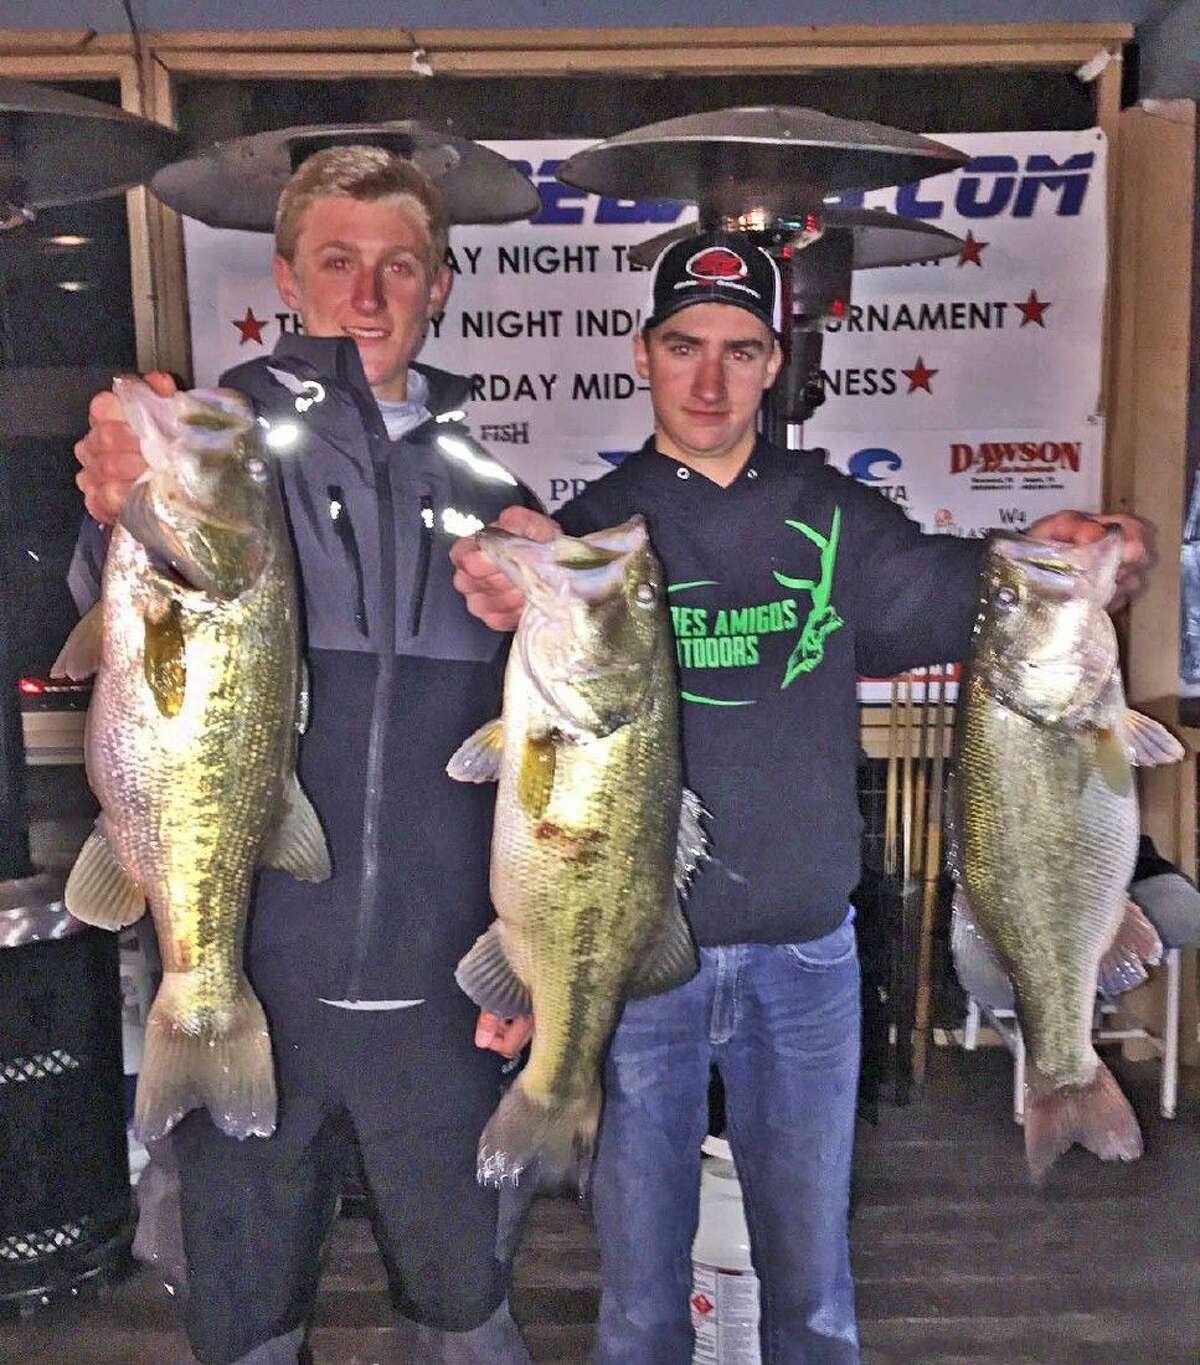 Derek Pietsch and Mason Roach came in third place in the CONROEBASS Tuesday tournament with a total stringer weight of 15.49 pounds.